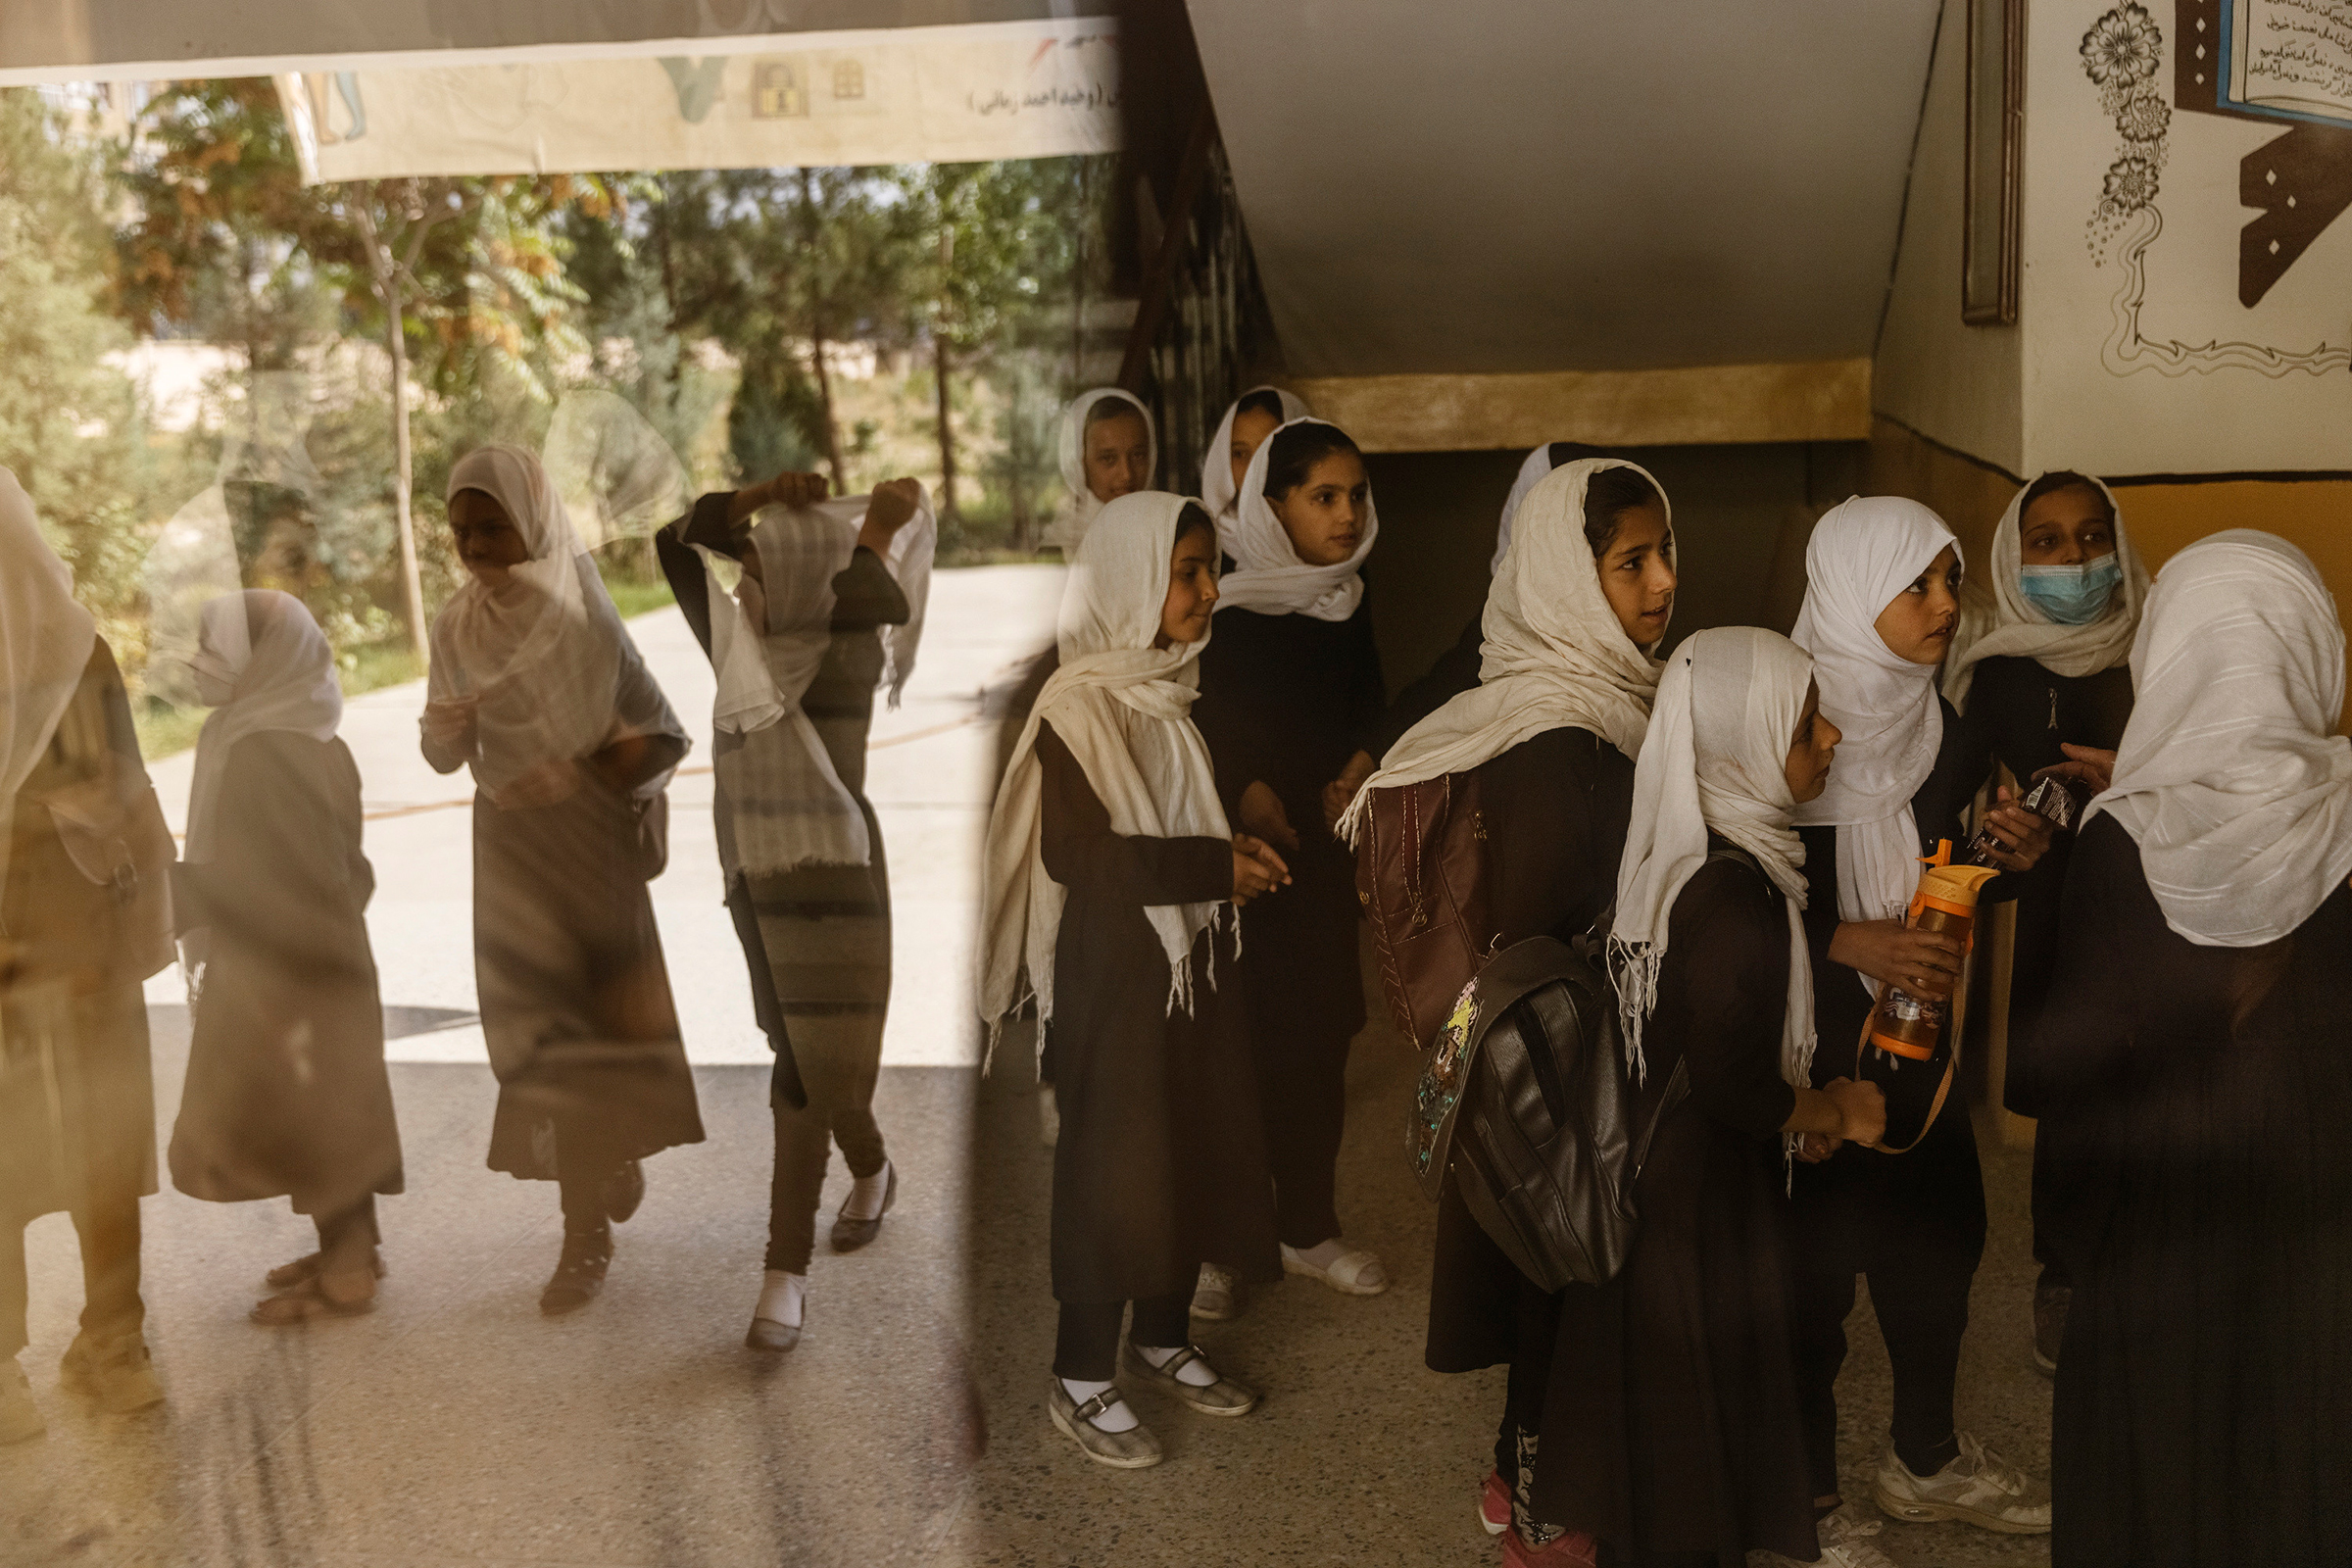 Girls wait to go to class at a school in Kabul on Sept. 15, 2021.